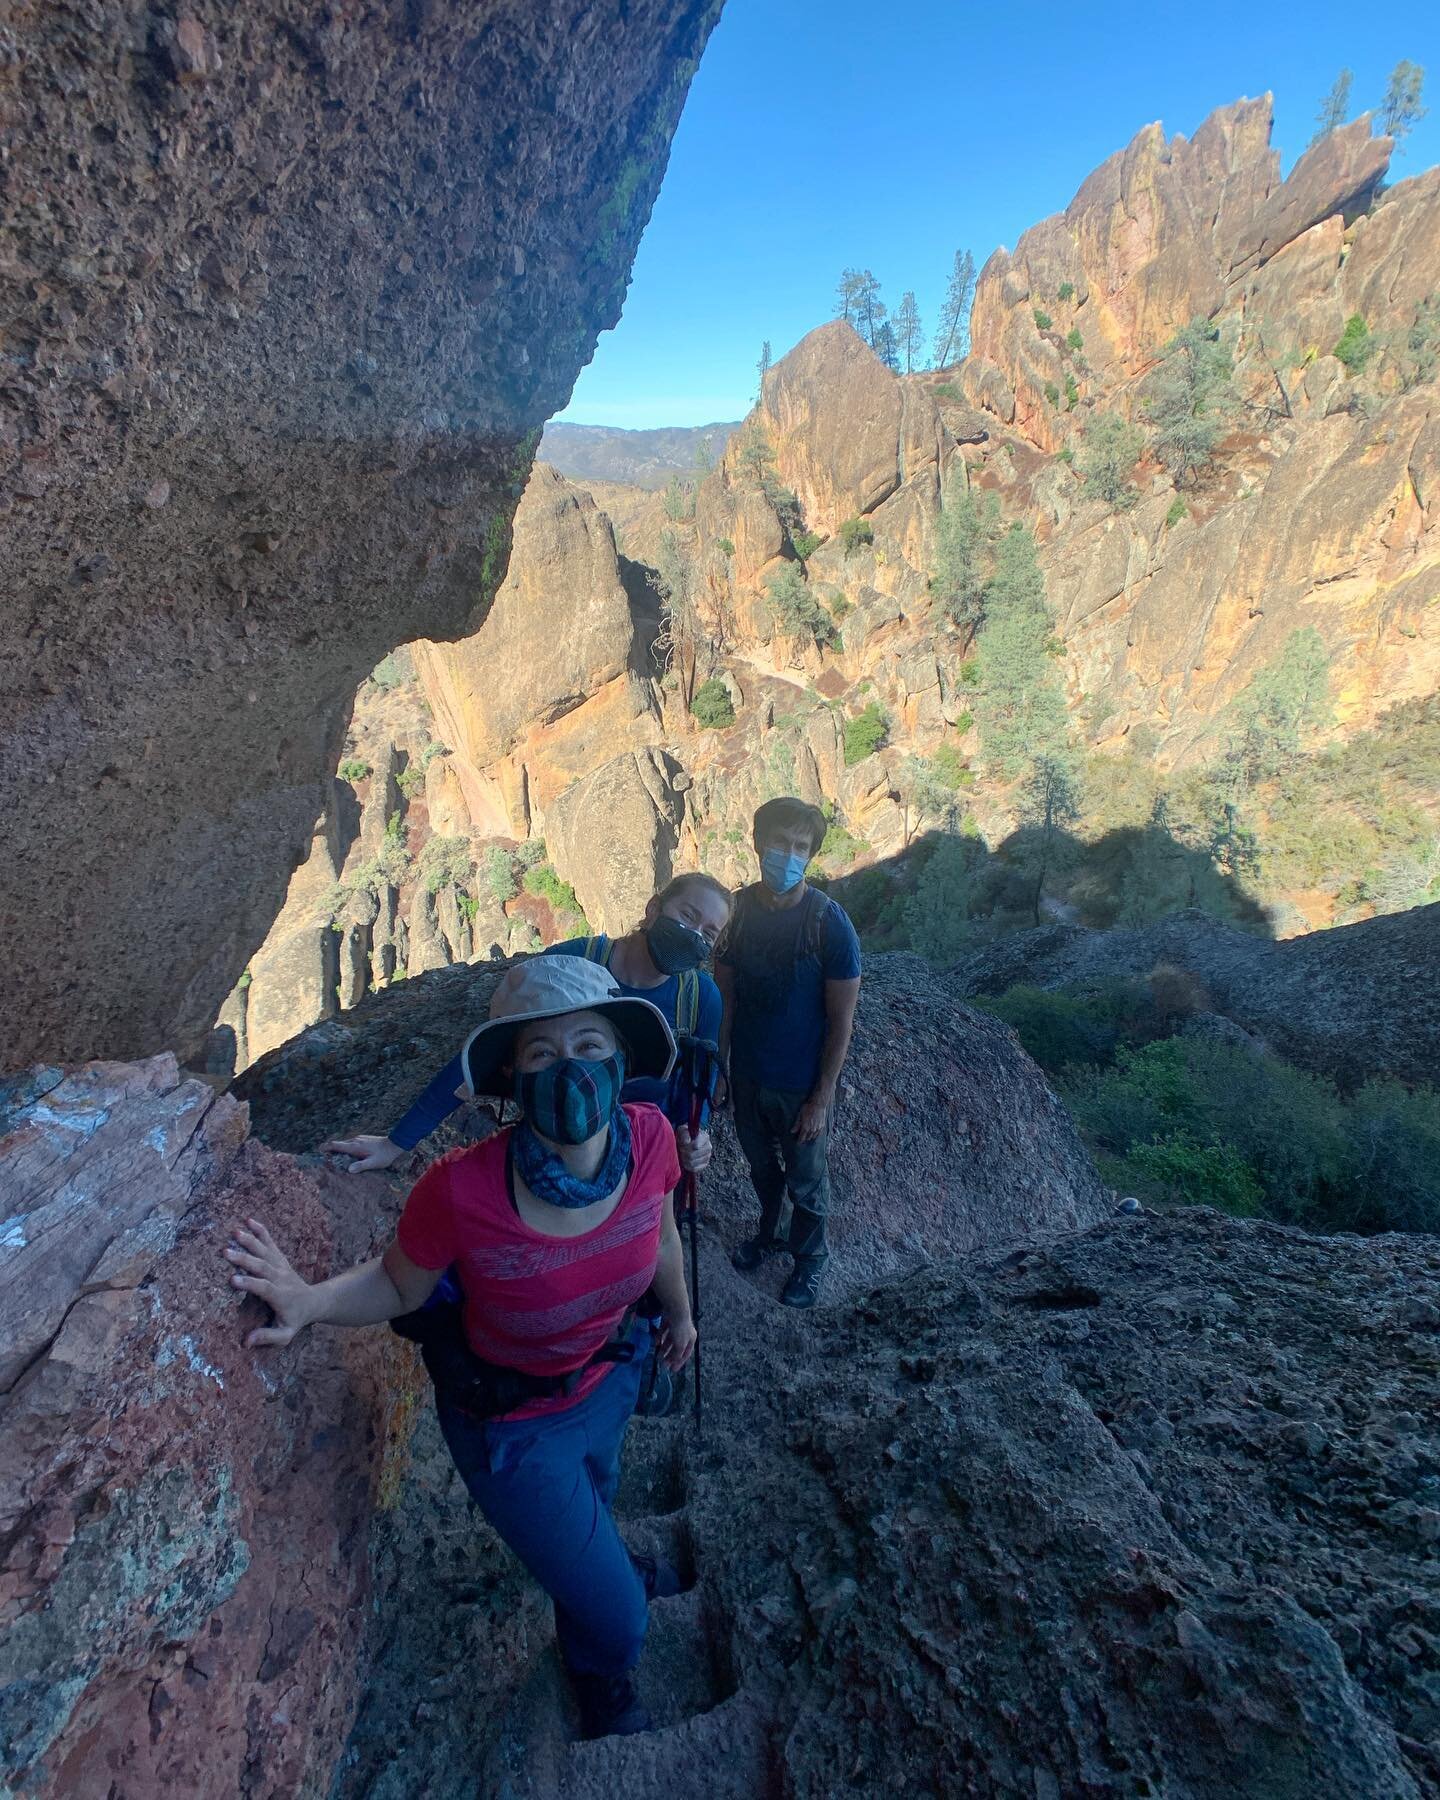 Pandemic hiking with friends means masks and hand sanitizer after touching the railings. It was my first time exploring Pinnacles National Park. We saw California Condors and hiked the &ldquo;steep and narrow&rdquo; trail. A glorious day to remind me